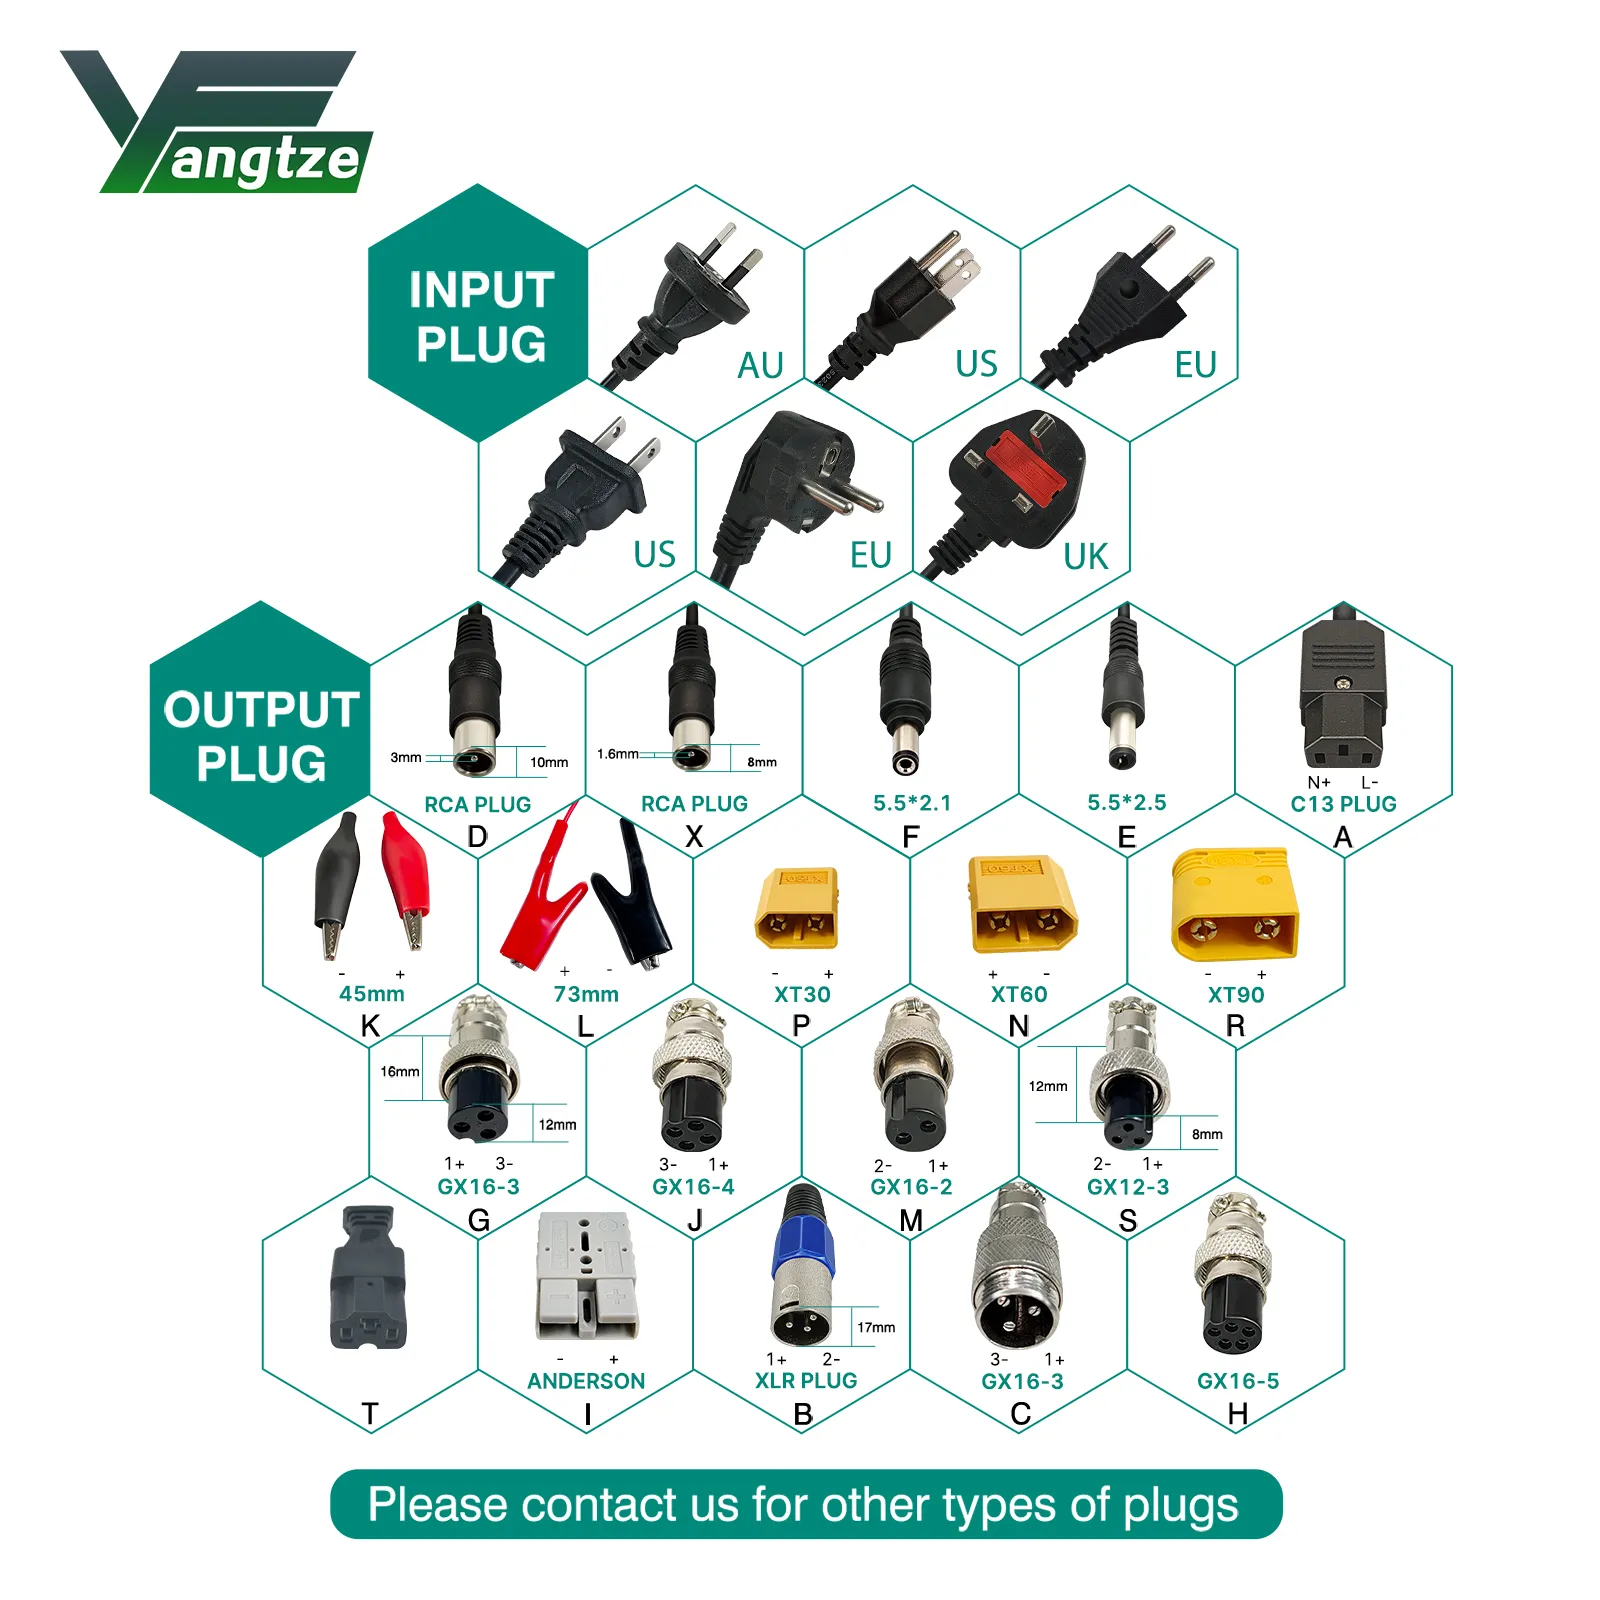 Yangtze 42V 10A Lithium Battery Charger 10 Series for 36V Polymer Scooter e-pike e-tool عالية الجودة مع مراوح التبريد